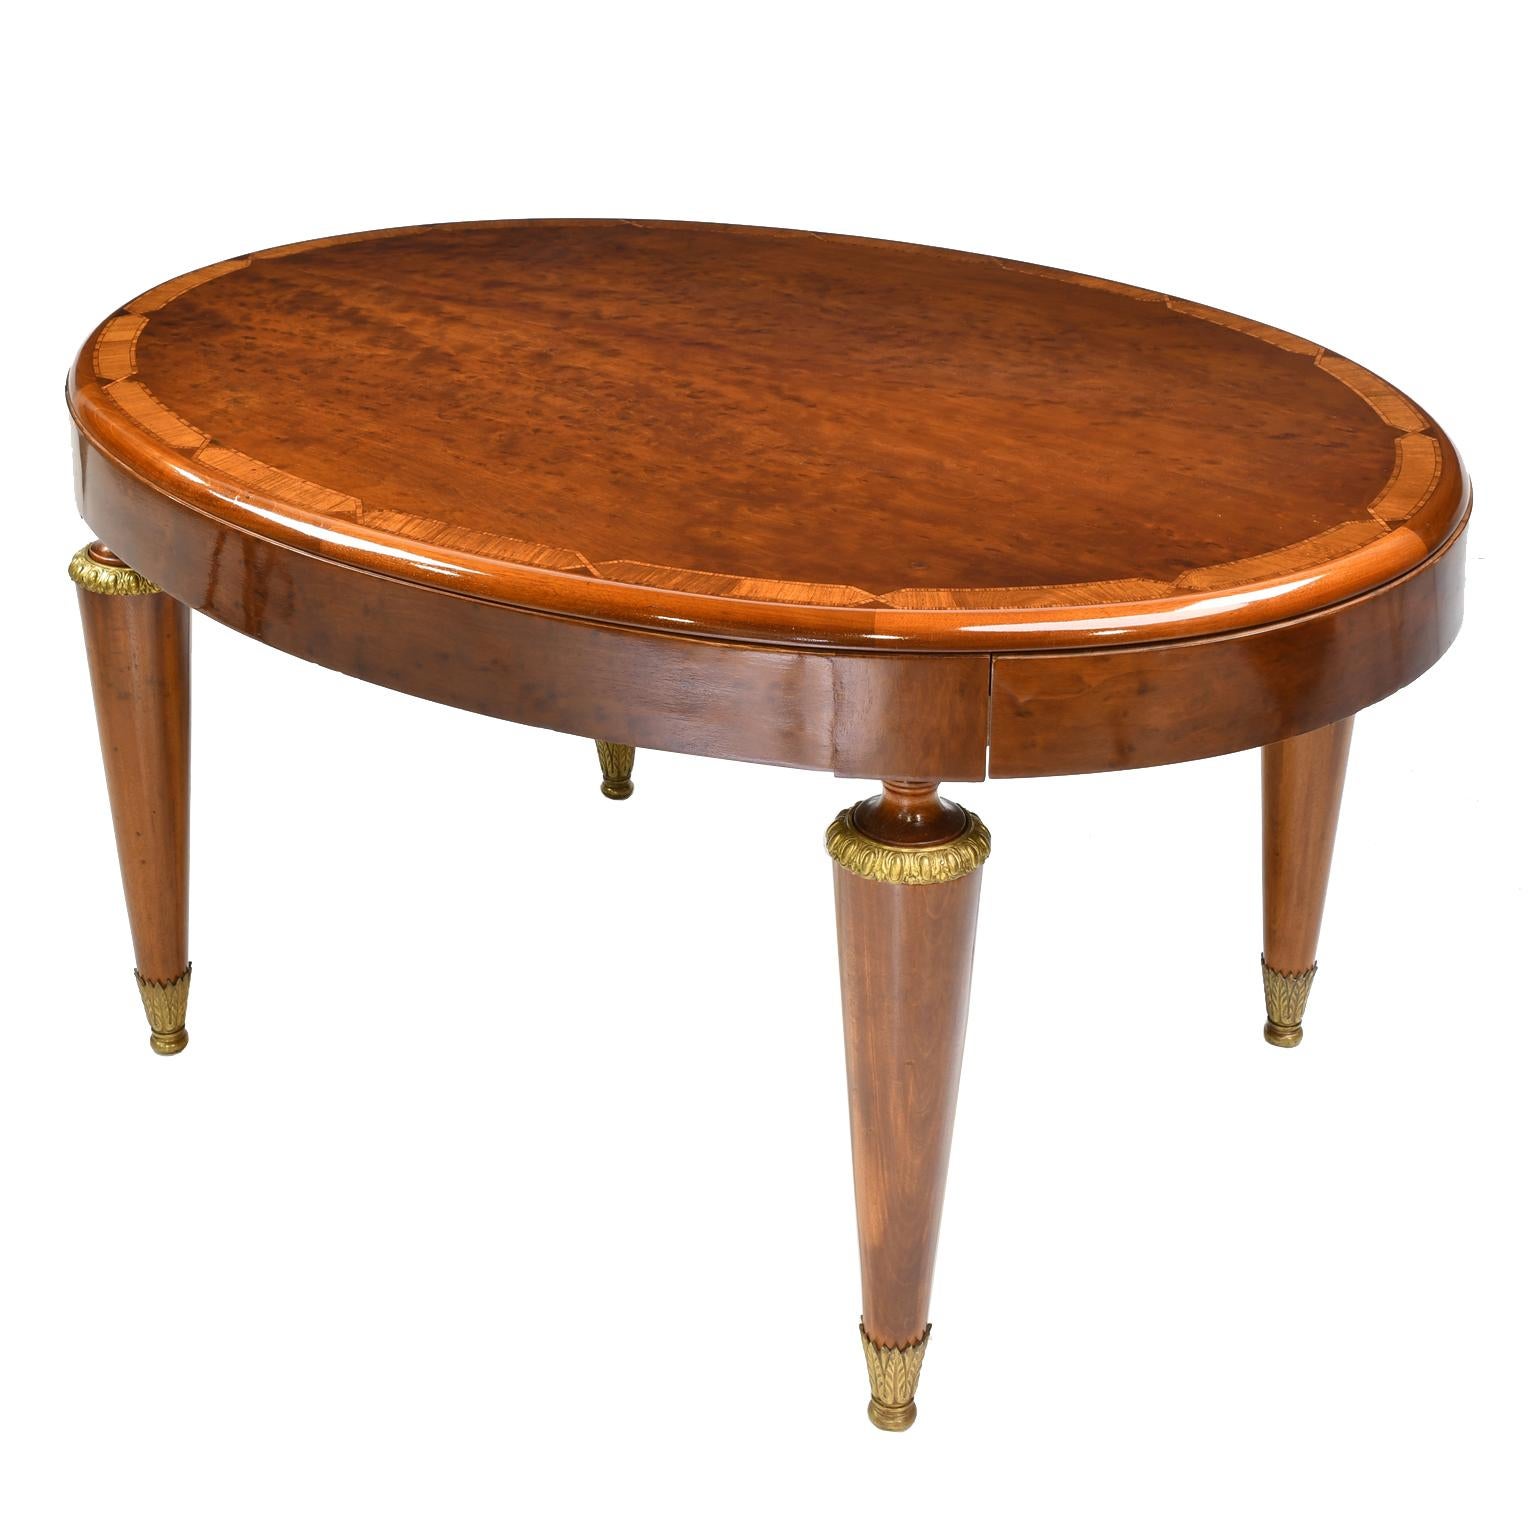 Bronze Antique European Art Deco Oval Dining Table in Polished Mahogany and Maple